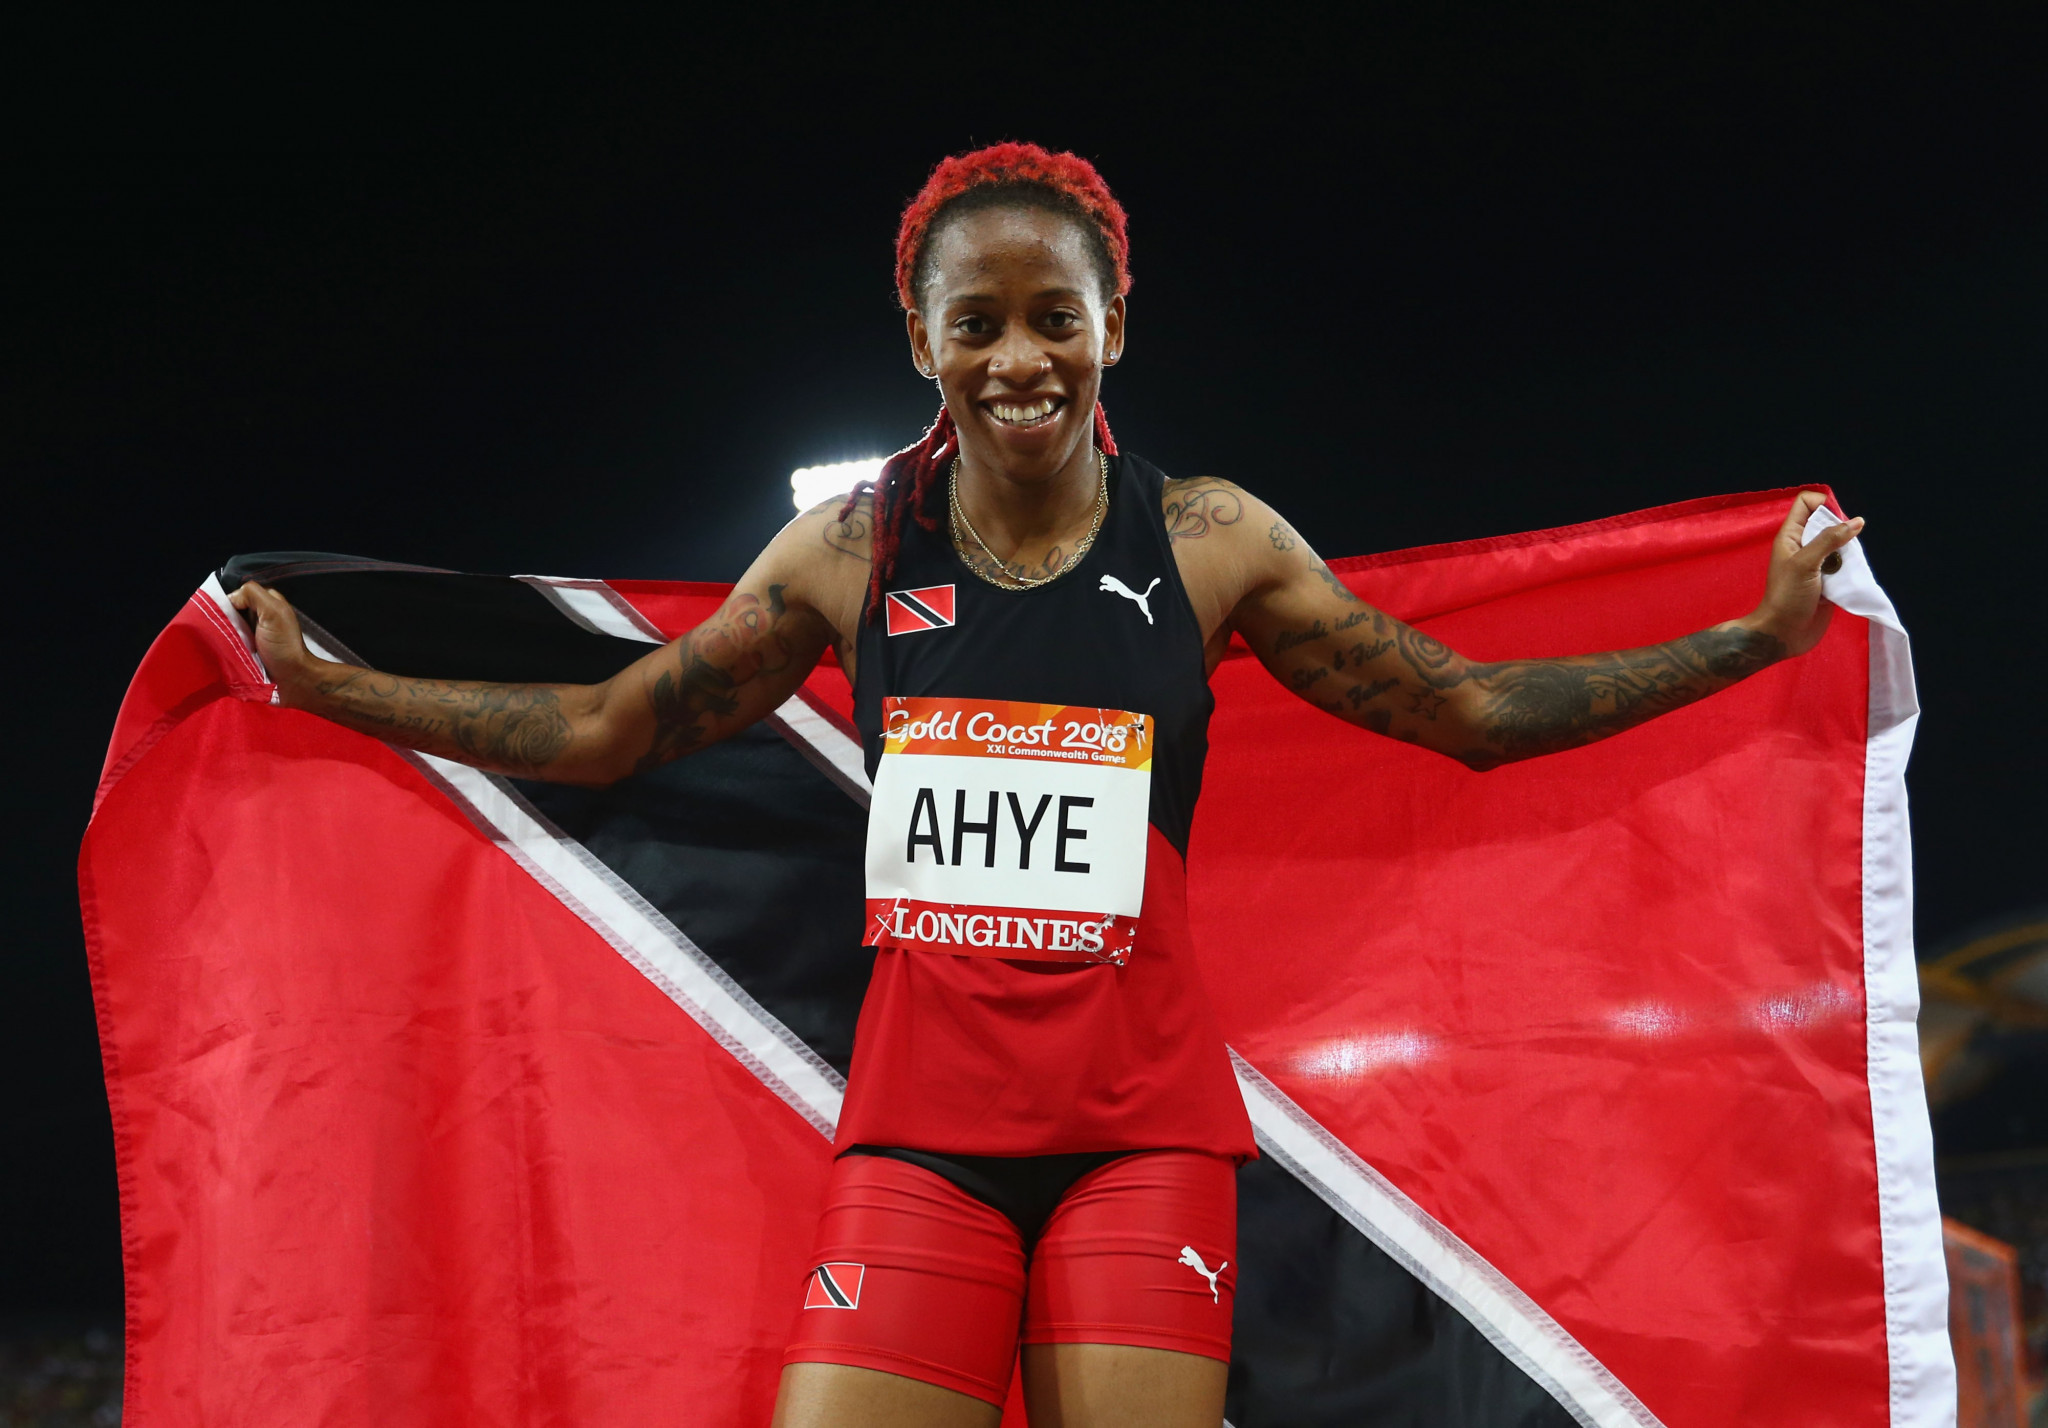 Michelle-Lee Ahye had earlier won Trinidad and Tobago's first-ever women's Commonwealth Games track and field title with victory in the women's 100m ©Getty Images